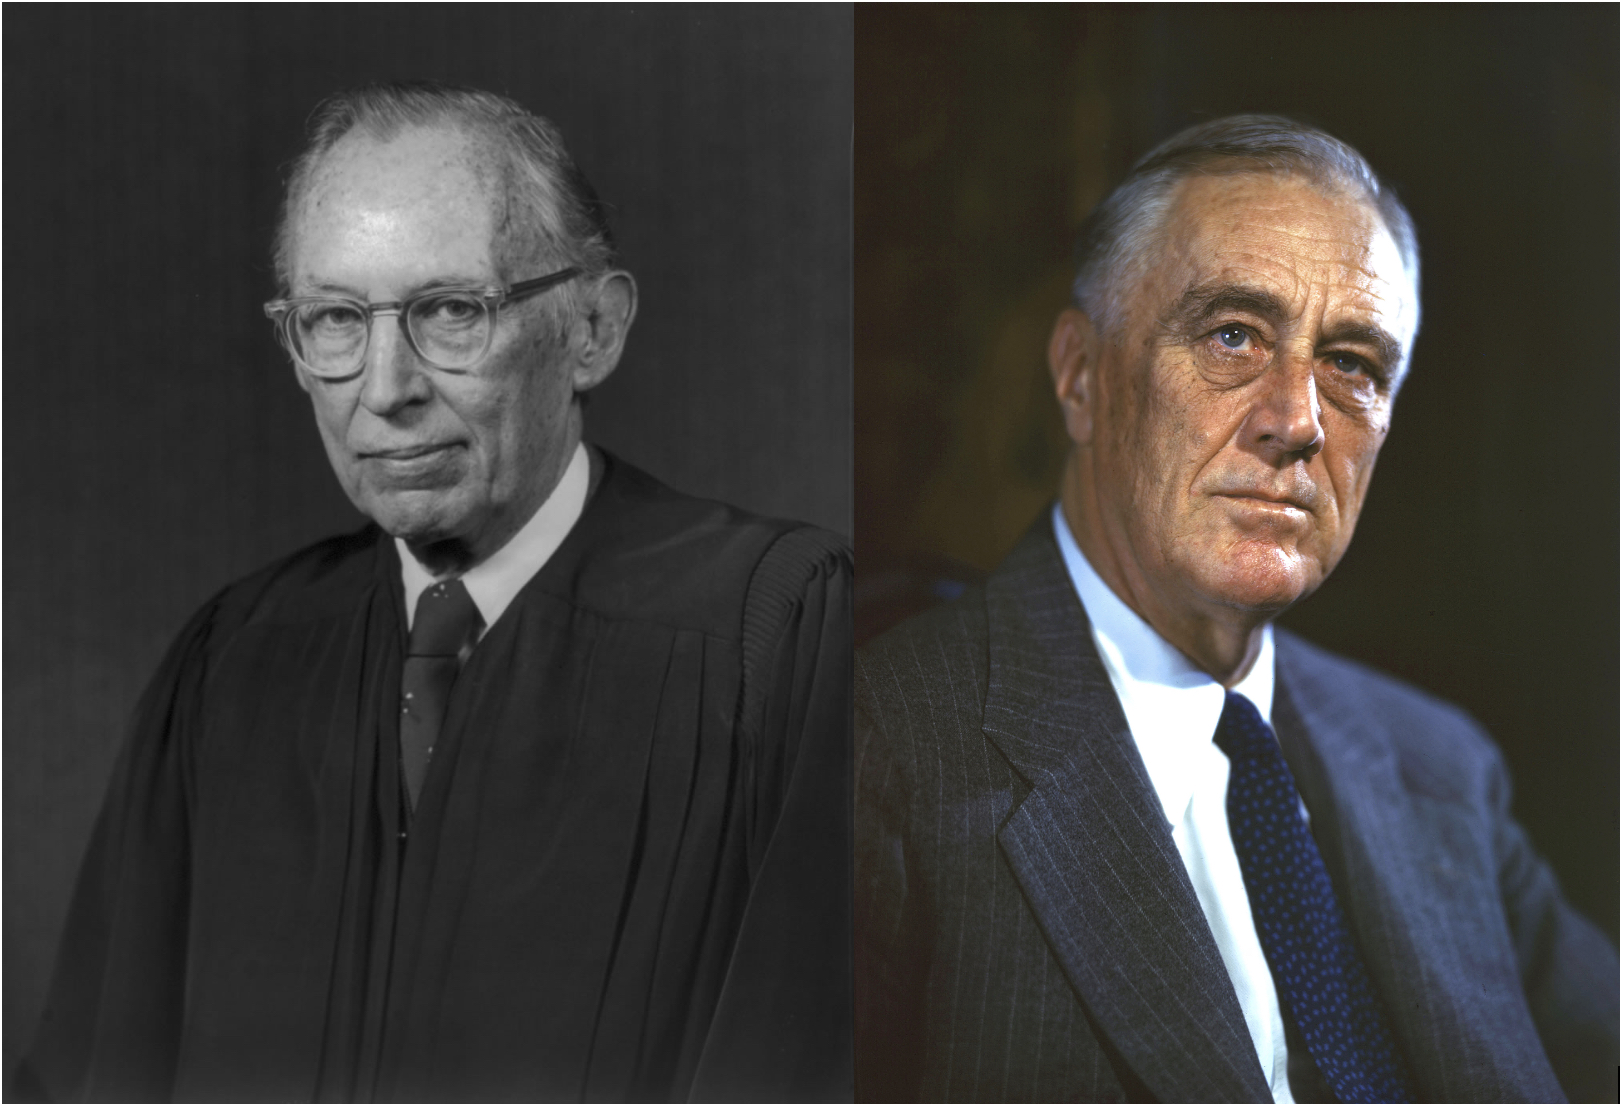 Portraits of Justice Lewis Powell and President Franklin Roosevelt